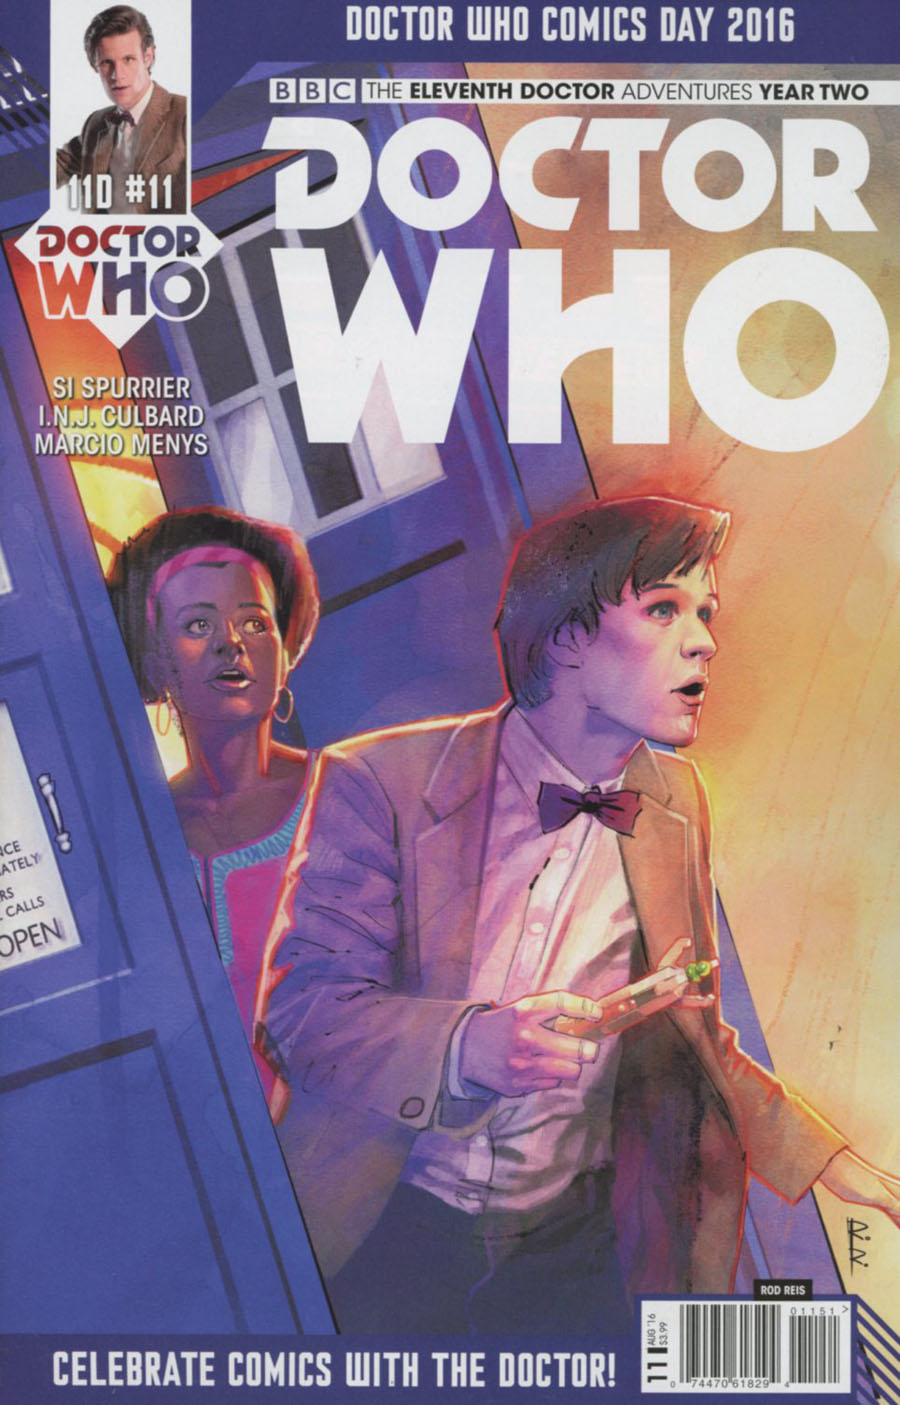 Doctor Who 11th Doctor Year Two #12 Cover E Variant Rod Reis Doctor Who Comics Day 2016 Cover